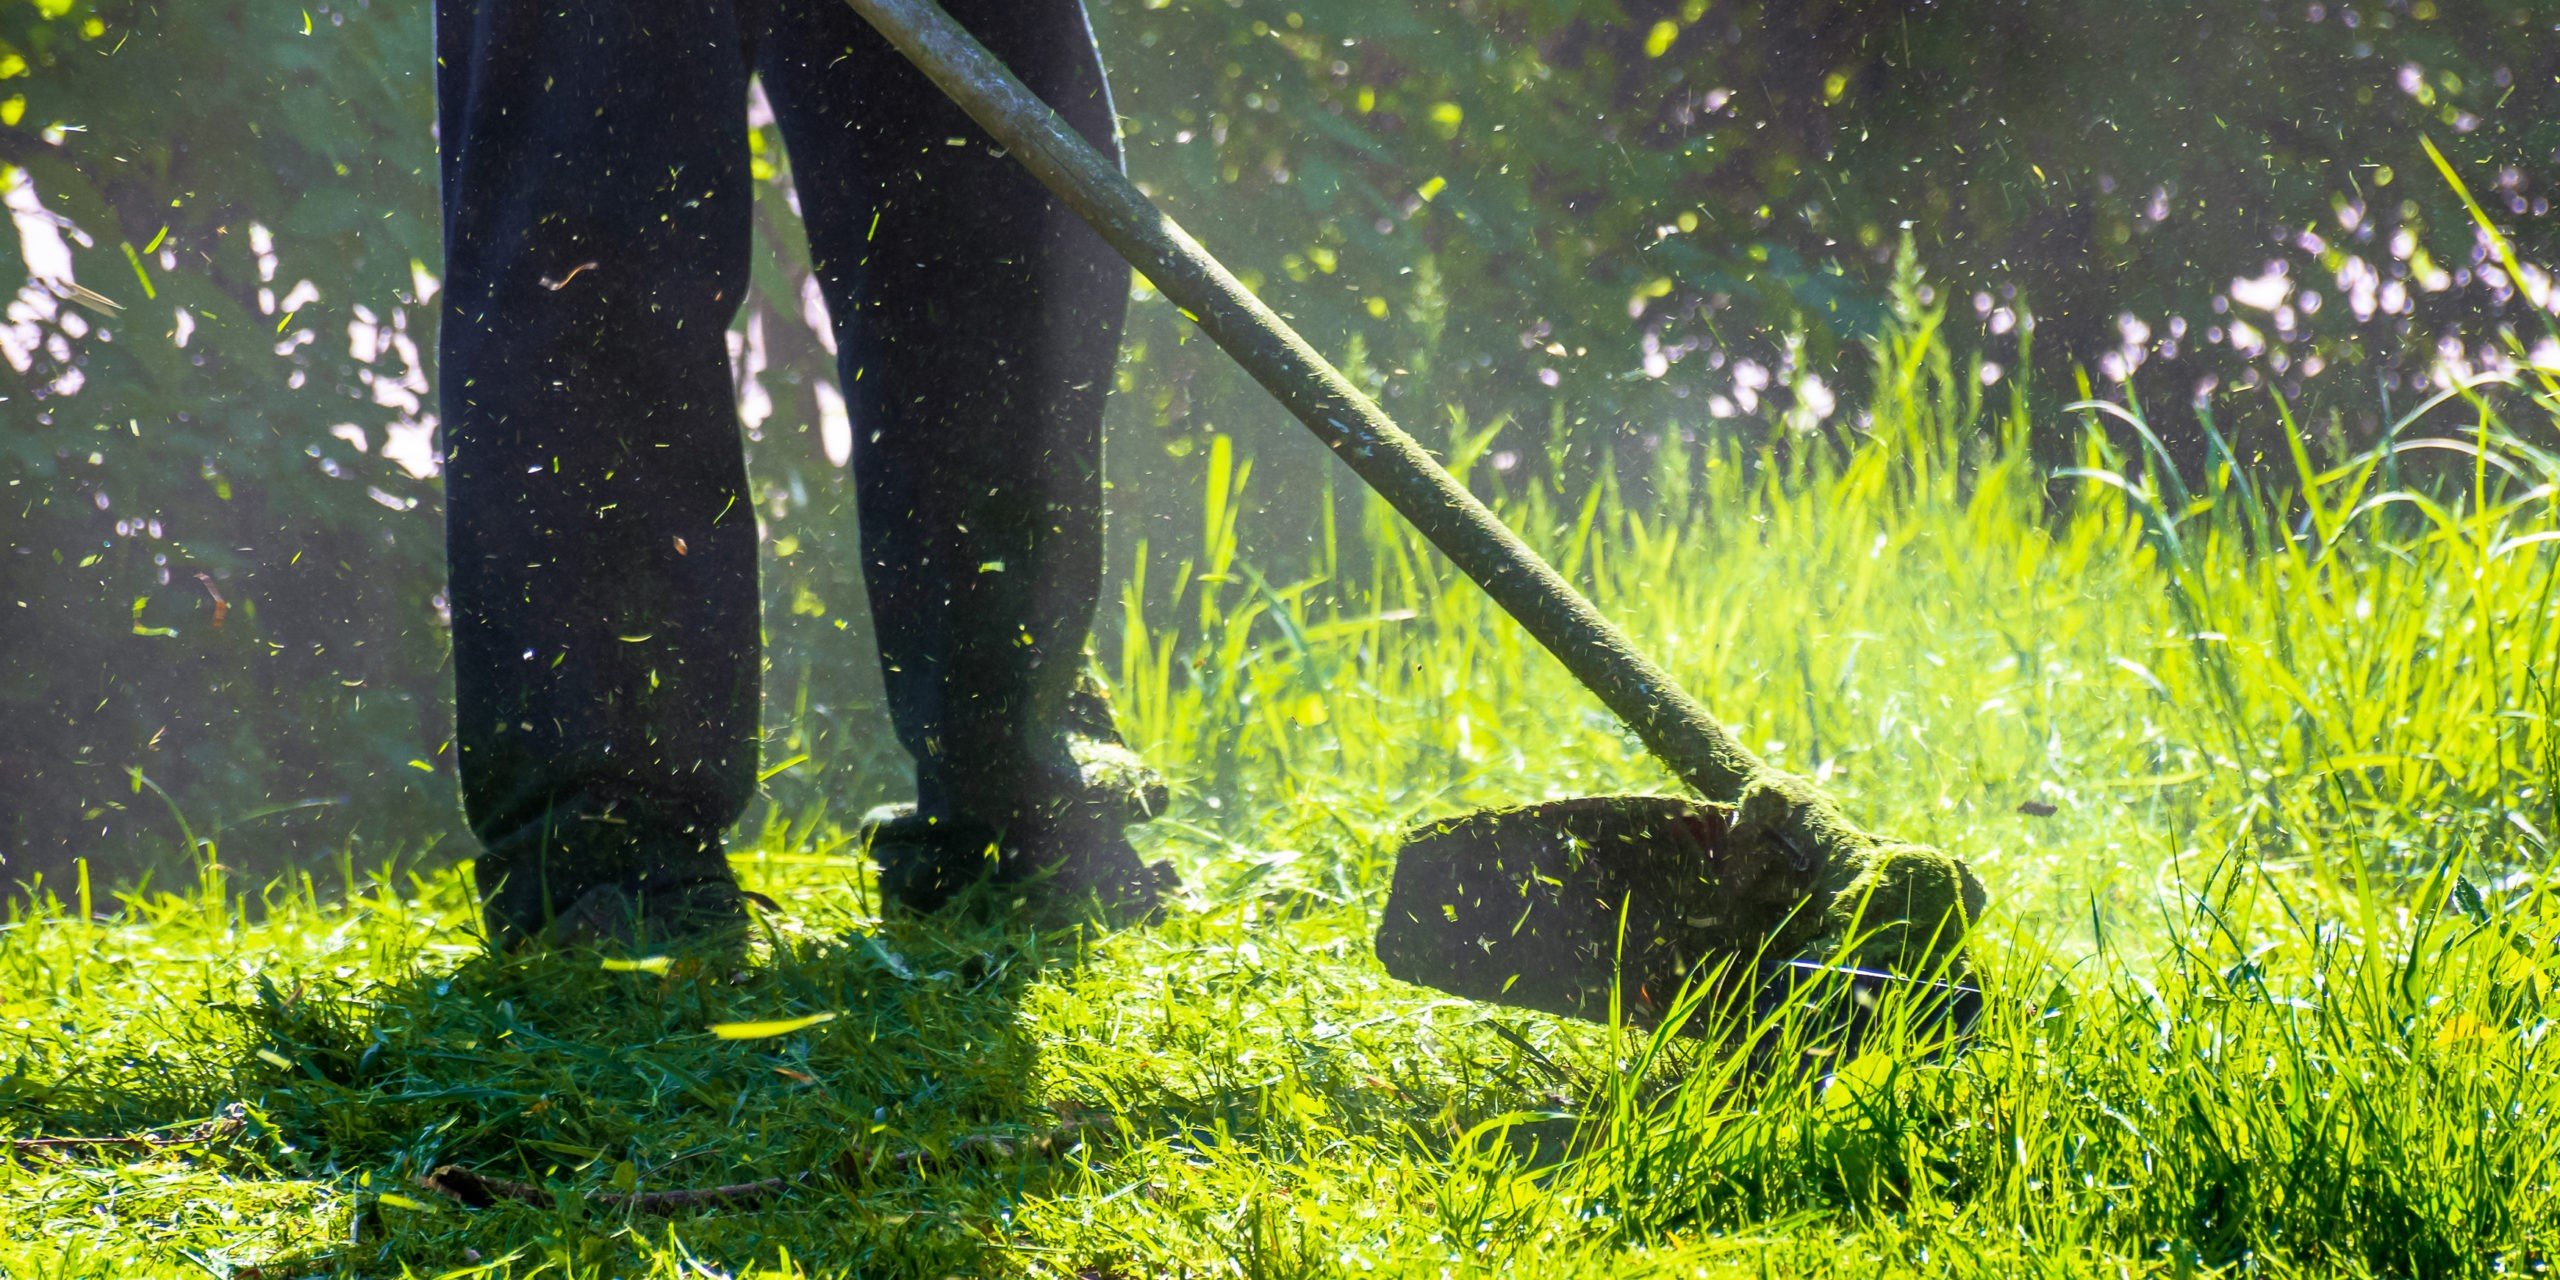 Lawn Care Services, Maintenance, and Fertilizer - The Hoster Group